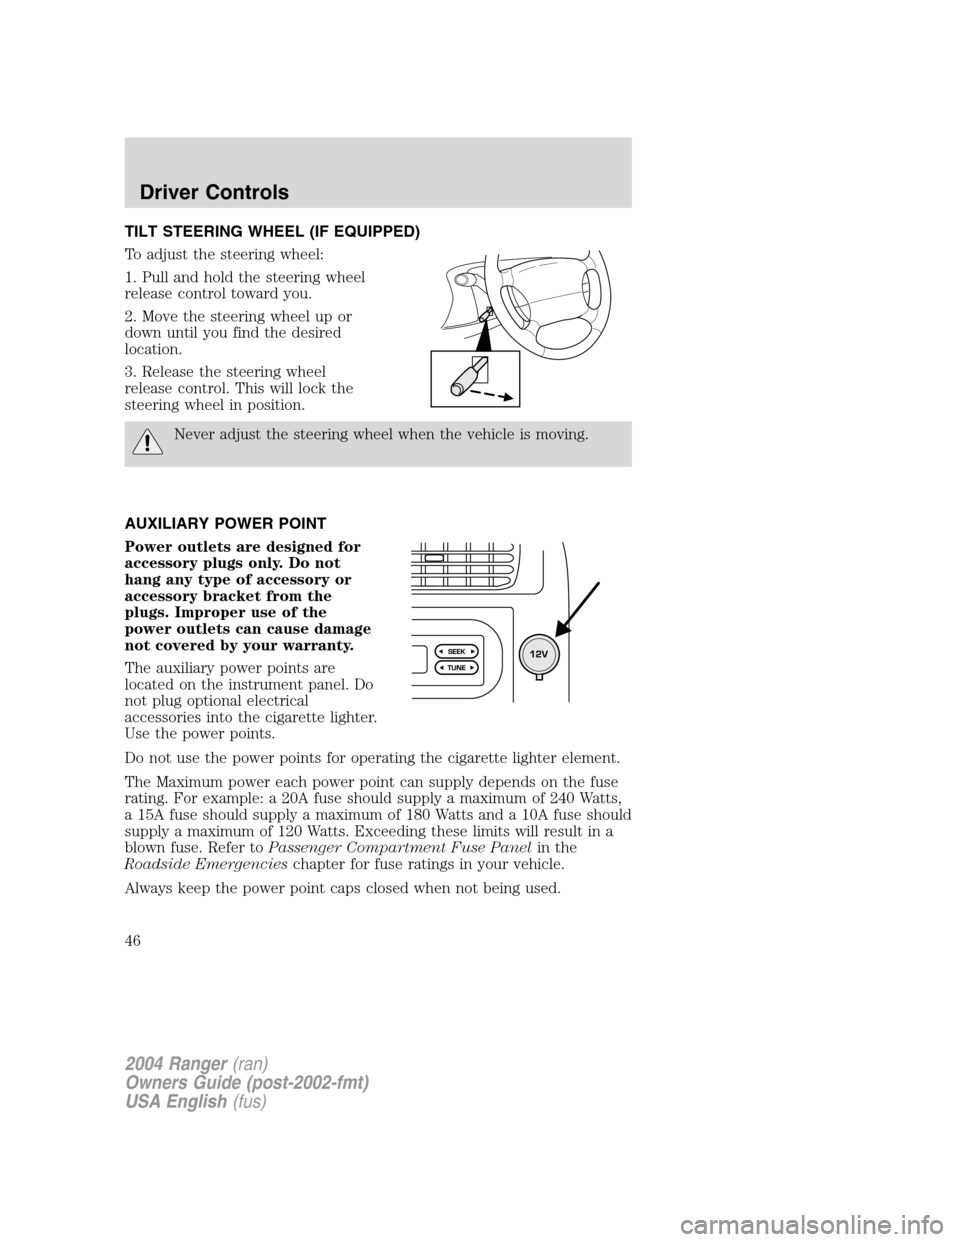 FORD RANGER 2004 2.G Service Manual TILT STEERING WHEEL (IF EQUIPPED)
To adjust the steering wheel:
1. Pull and hold the steering wheel
release control toward you.
2. Move the steering wheel up or
down until you find the desired
locatio